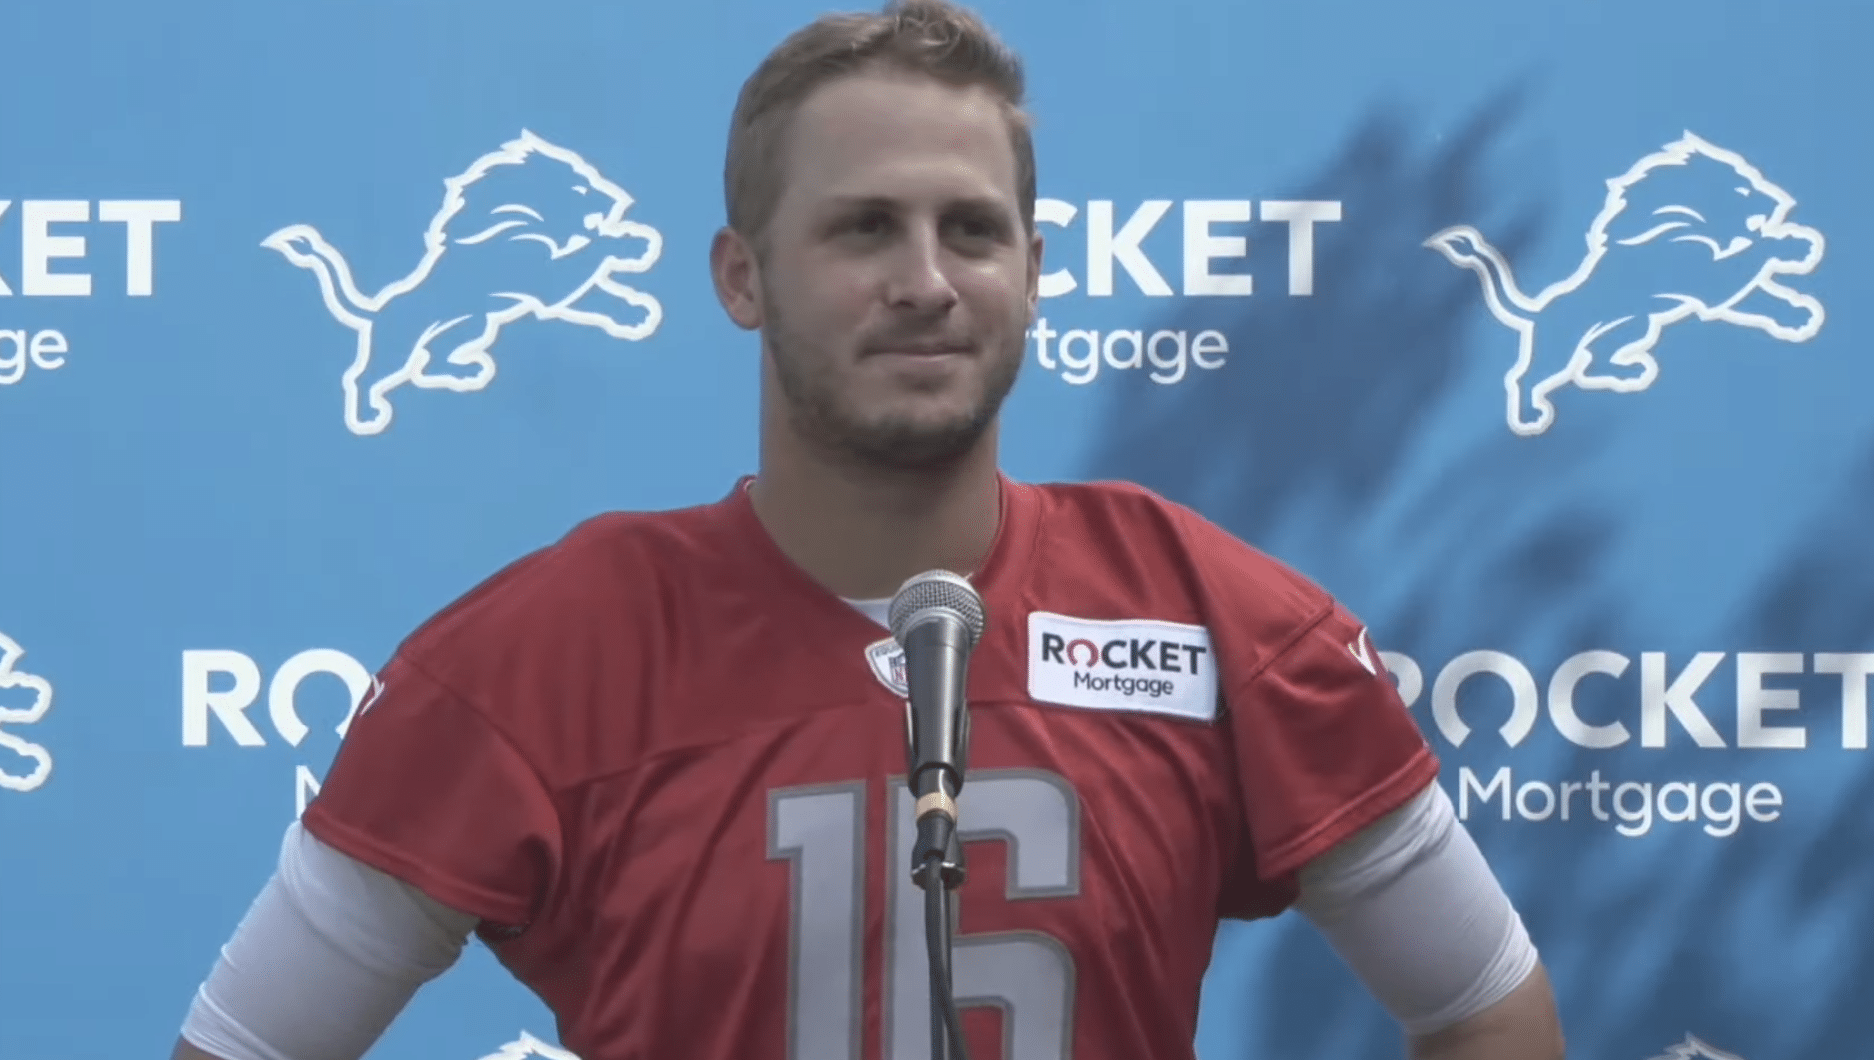 Pro Football Focus clearly does not like Jared Goff - Detroit